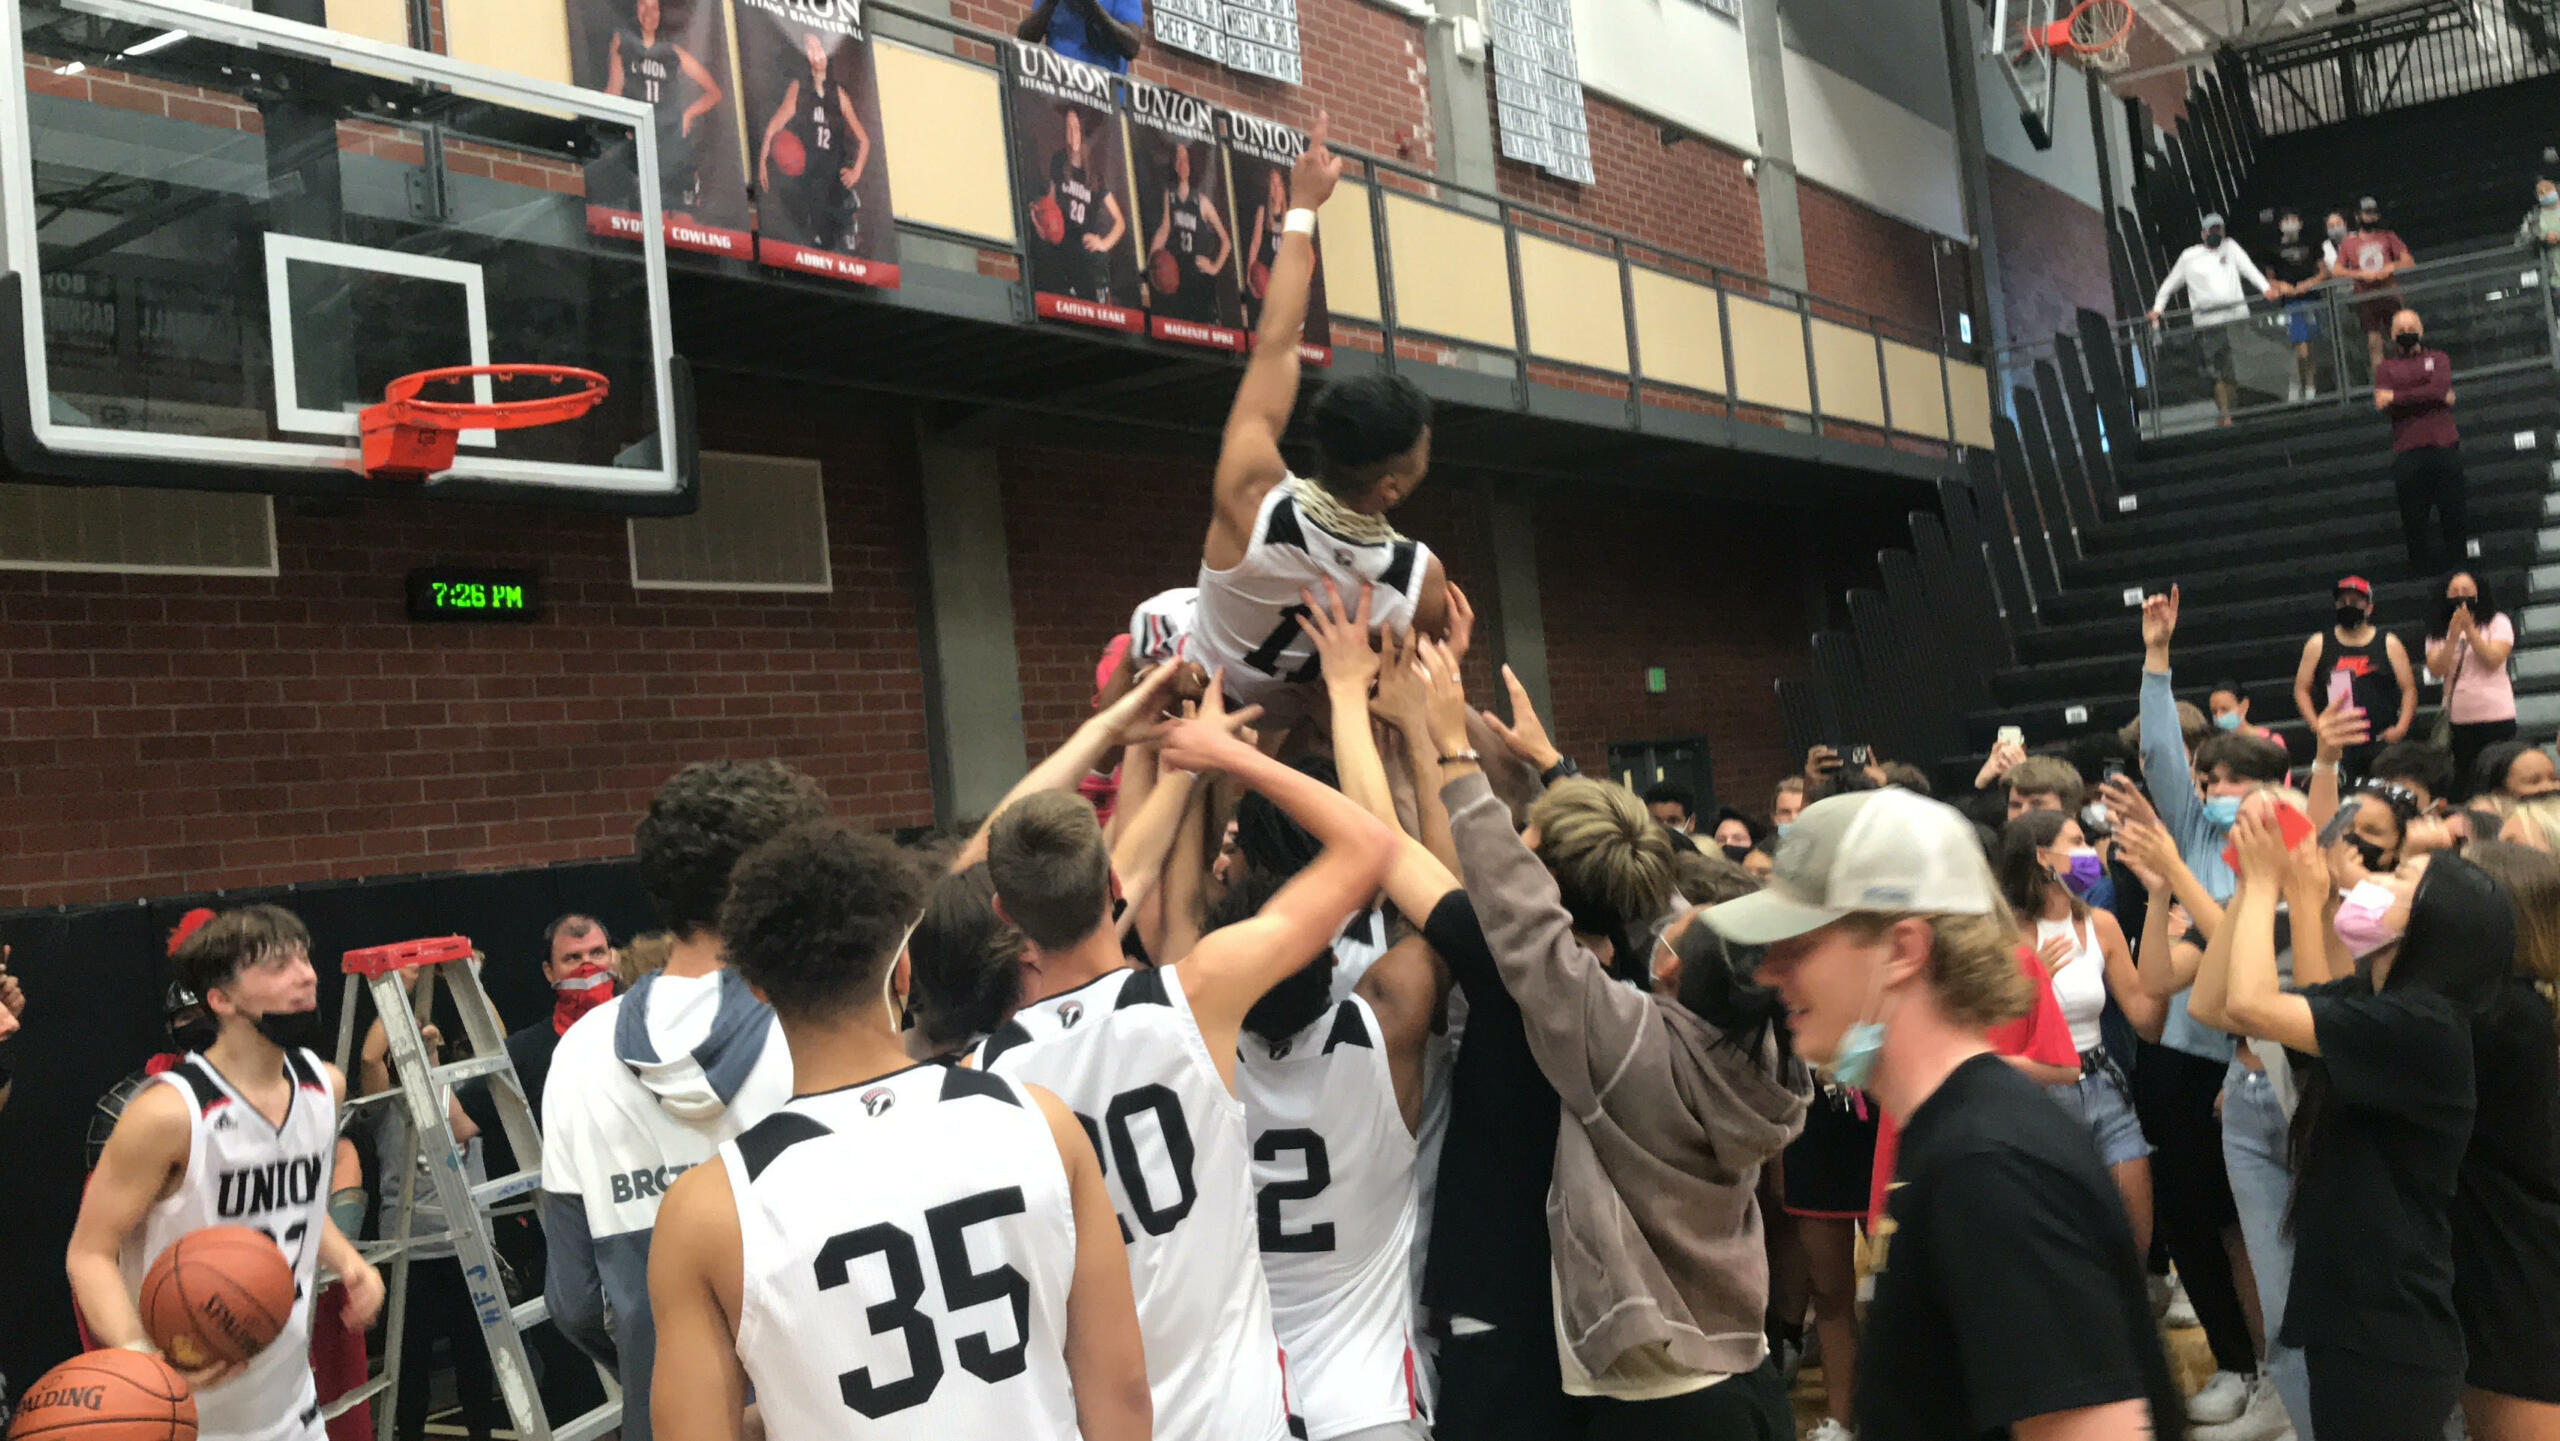 Union High School players and fans hoist Izaiah Vongnath after Vongnath cut down the net following Union's 61-60 victory over Skyview in Friday's 4A/3A GSHL district championship in boys basketball.